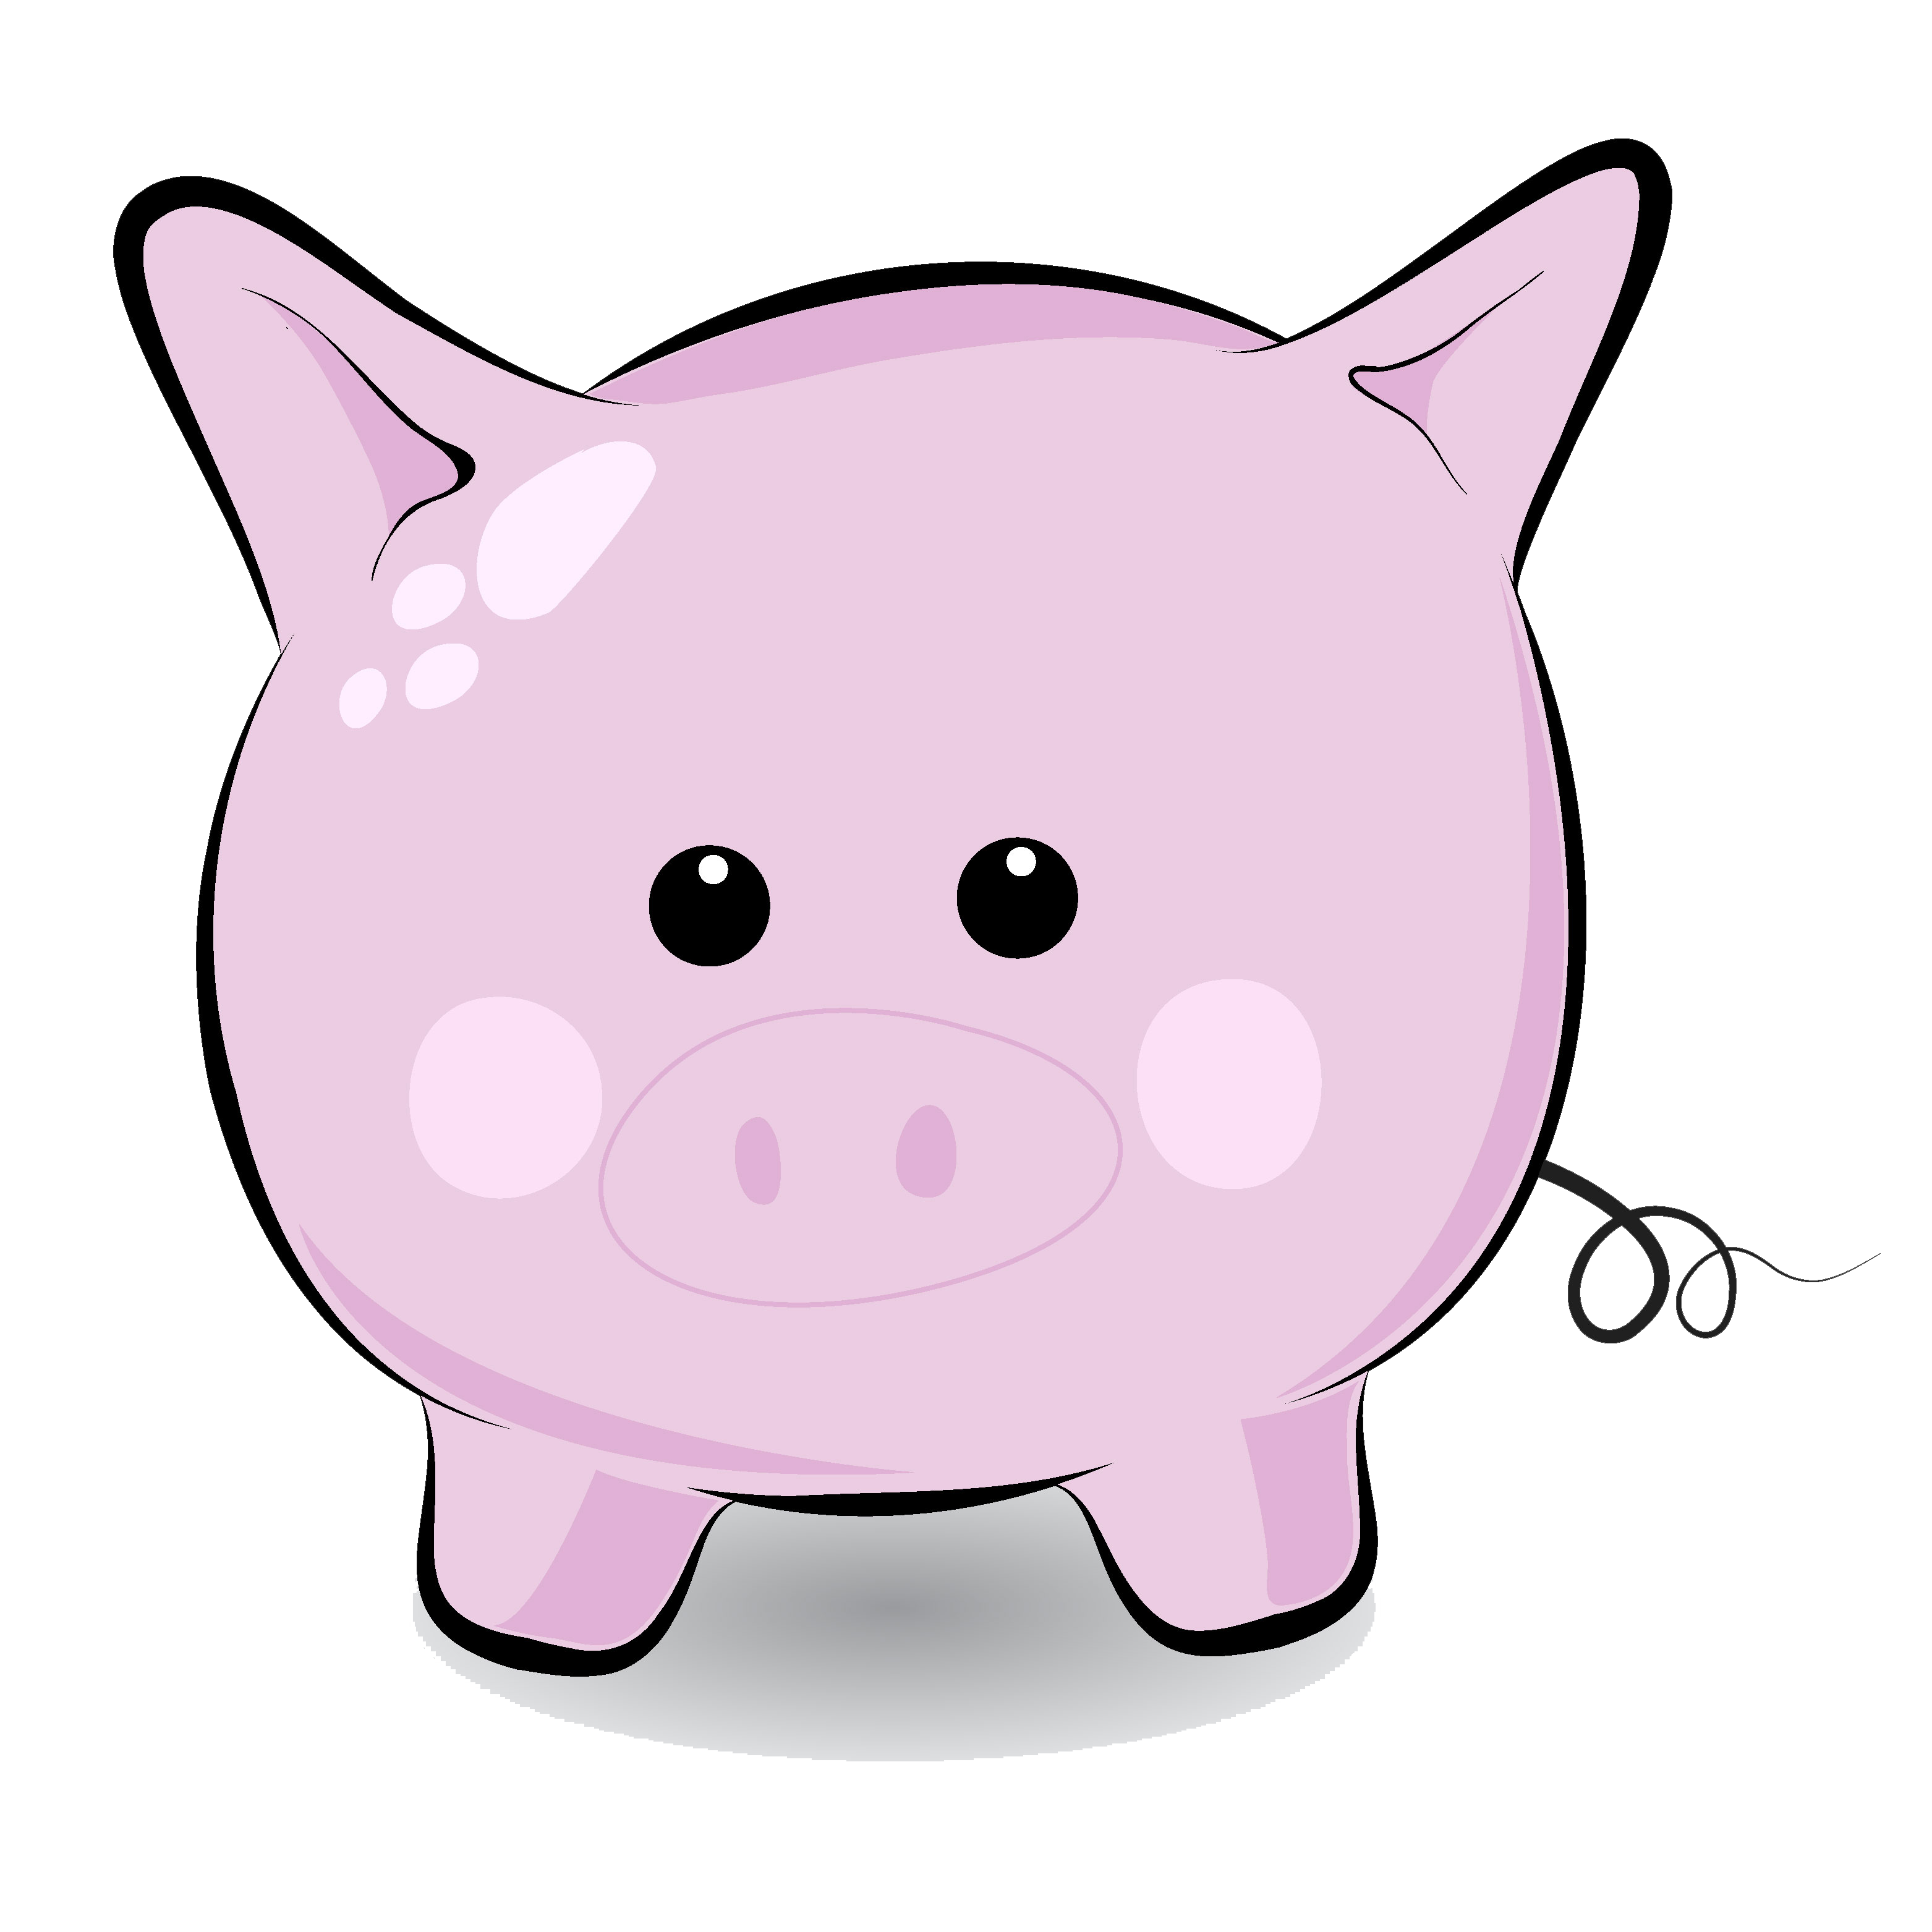 pig clip art animal zone | Clipart Panda - Free Clipart Images